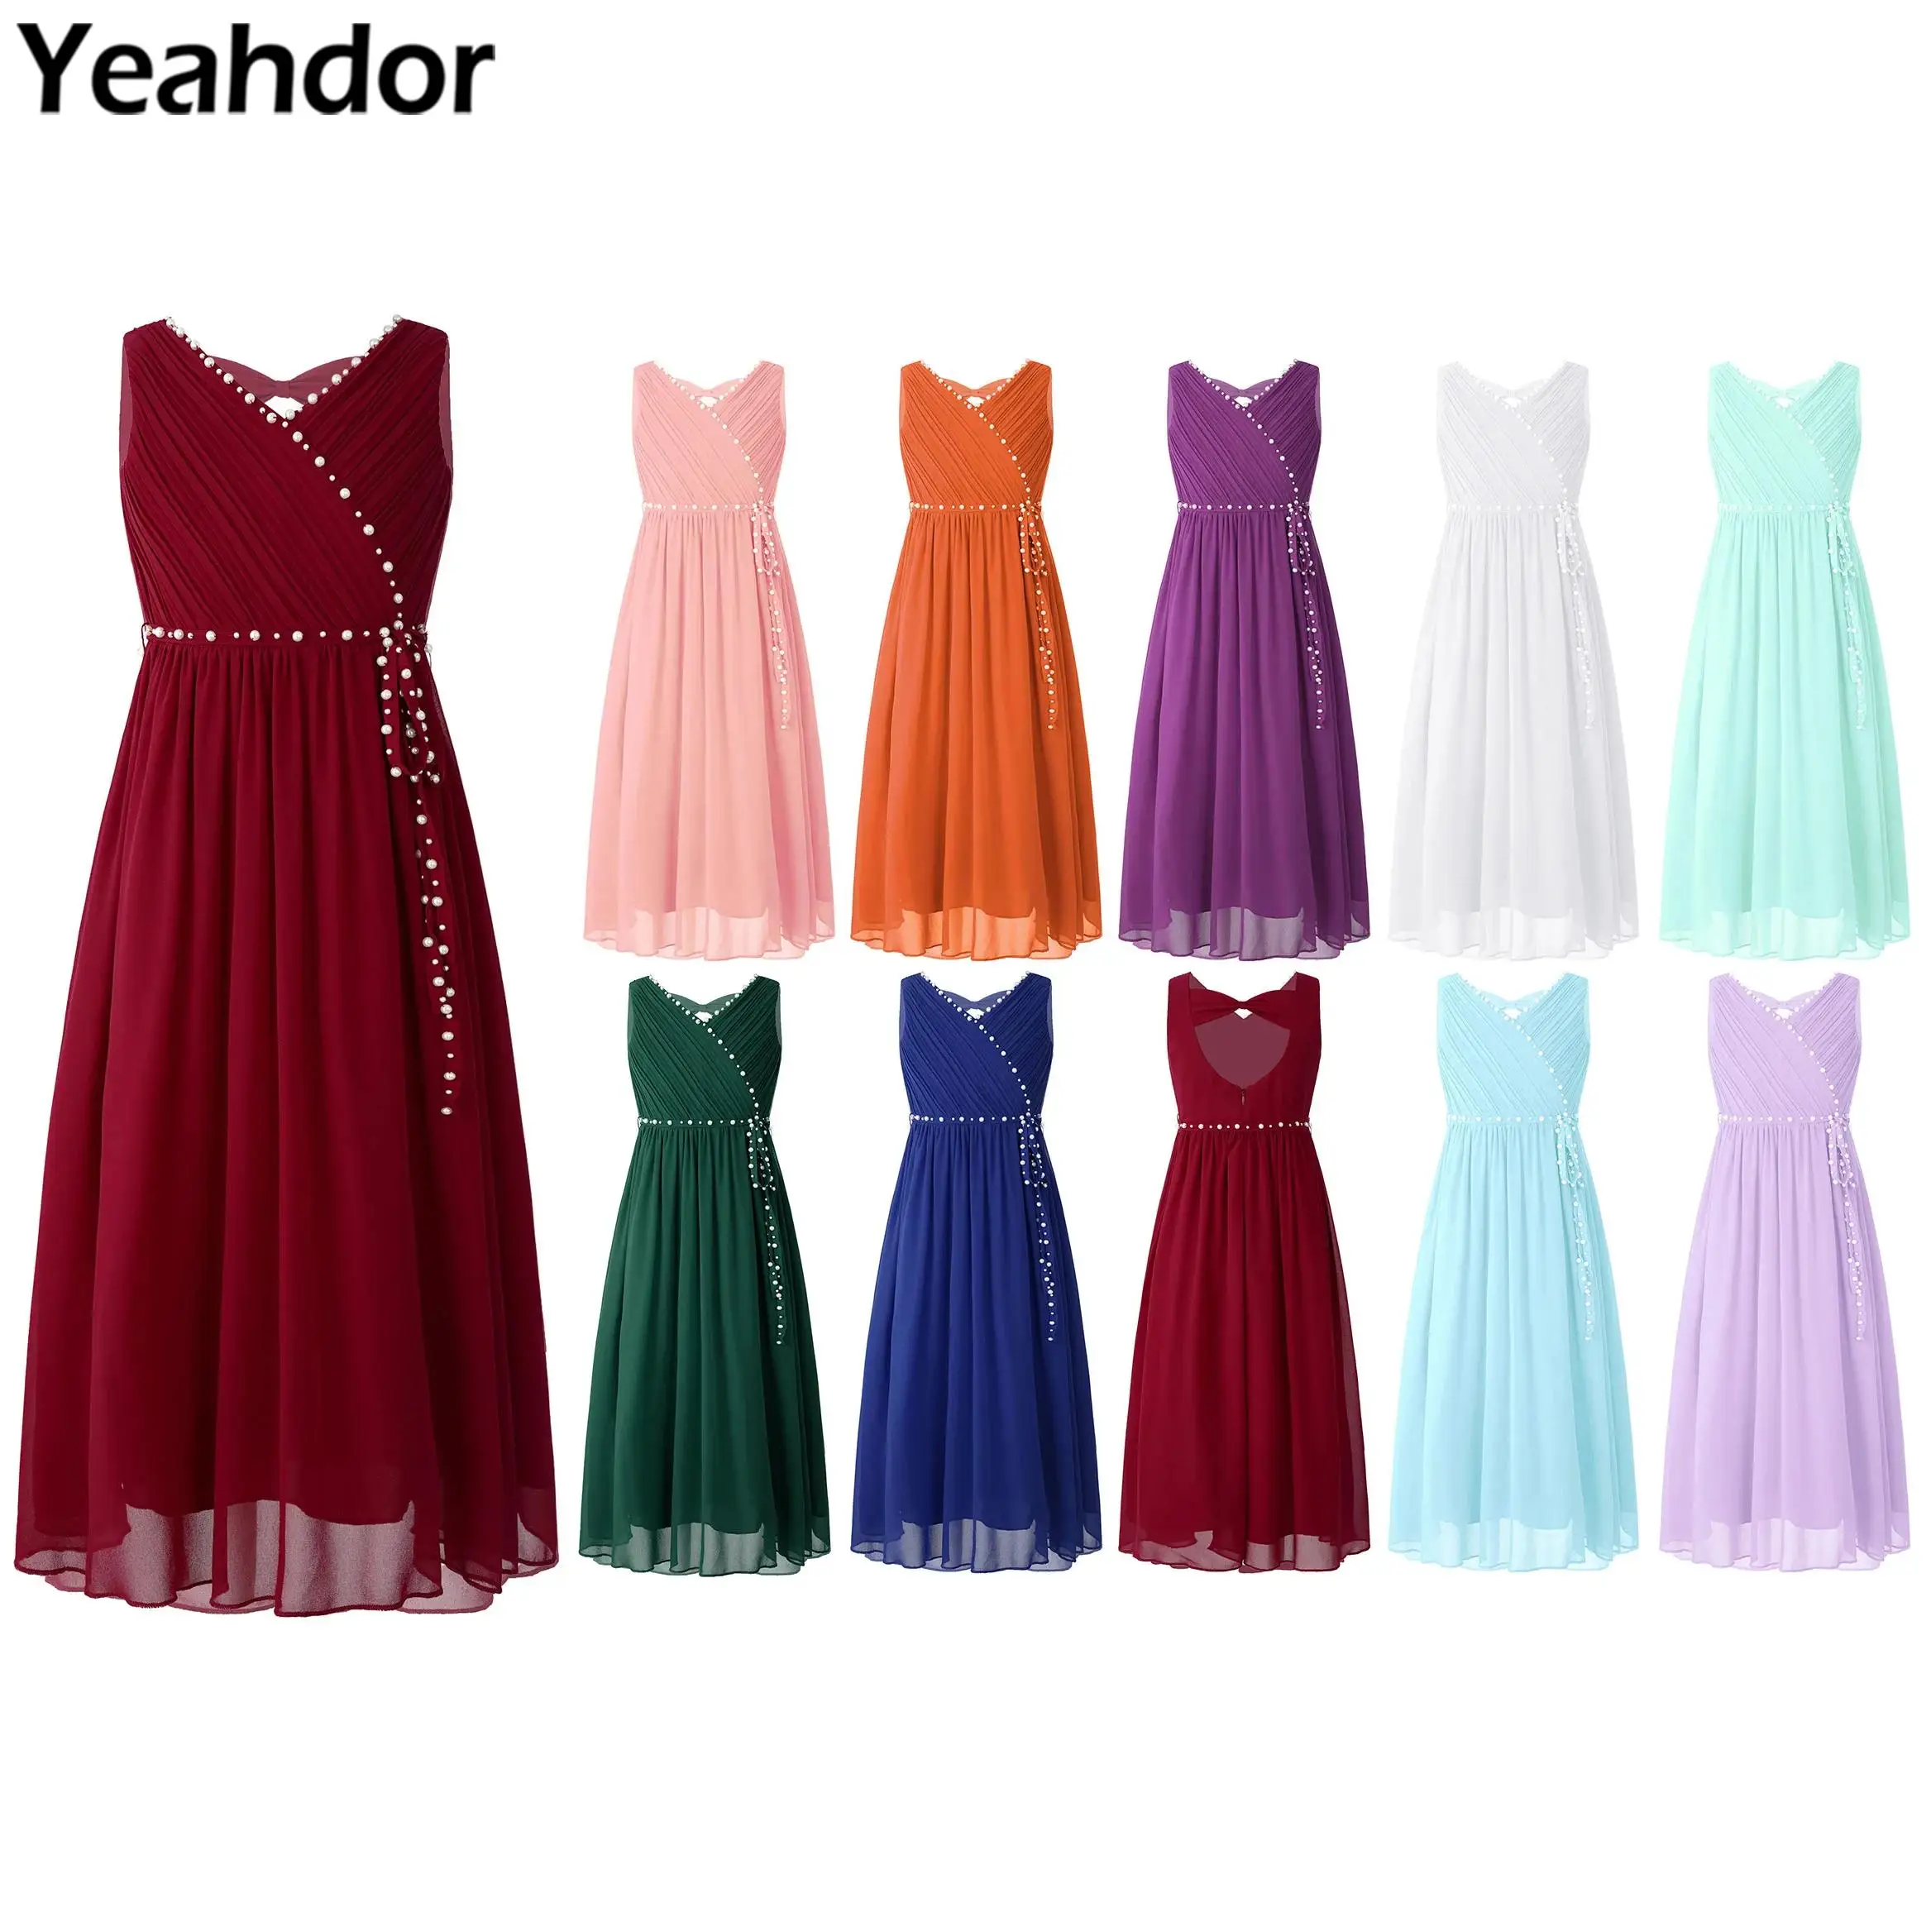 

Junior Bridesmaid Dresses Elegant Dress for Girls Kids Sleeveless Formal Wedding Costumes for Holy Communion Birthday Party Gown